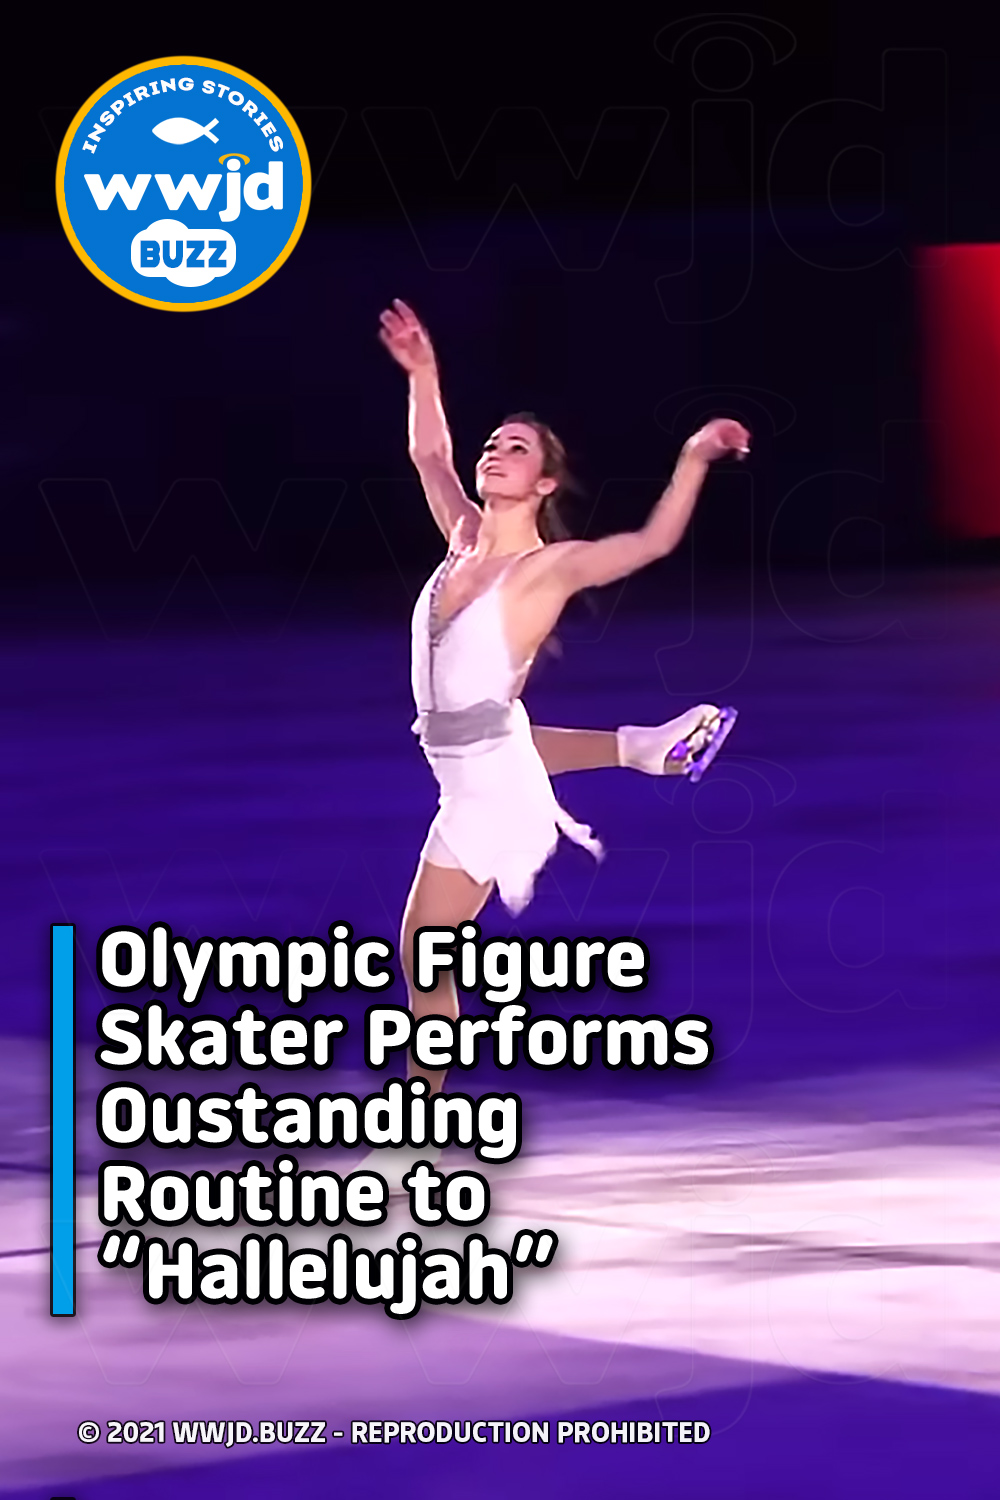 Olympic Figure Skater Performs Oustanding Routine to “Hallelujah”